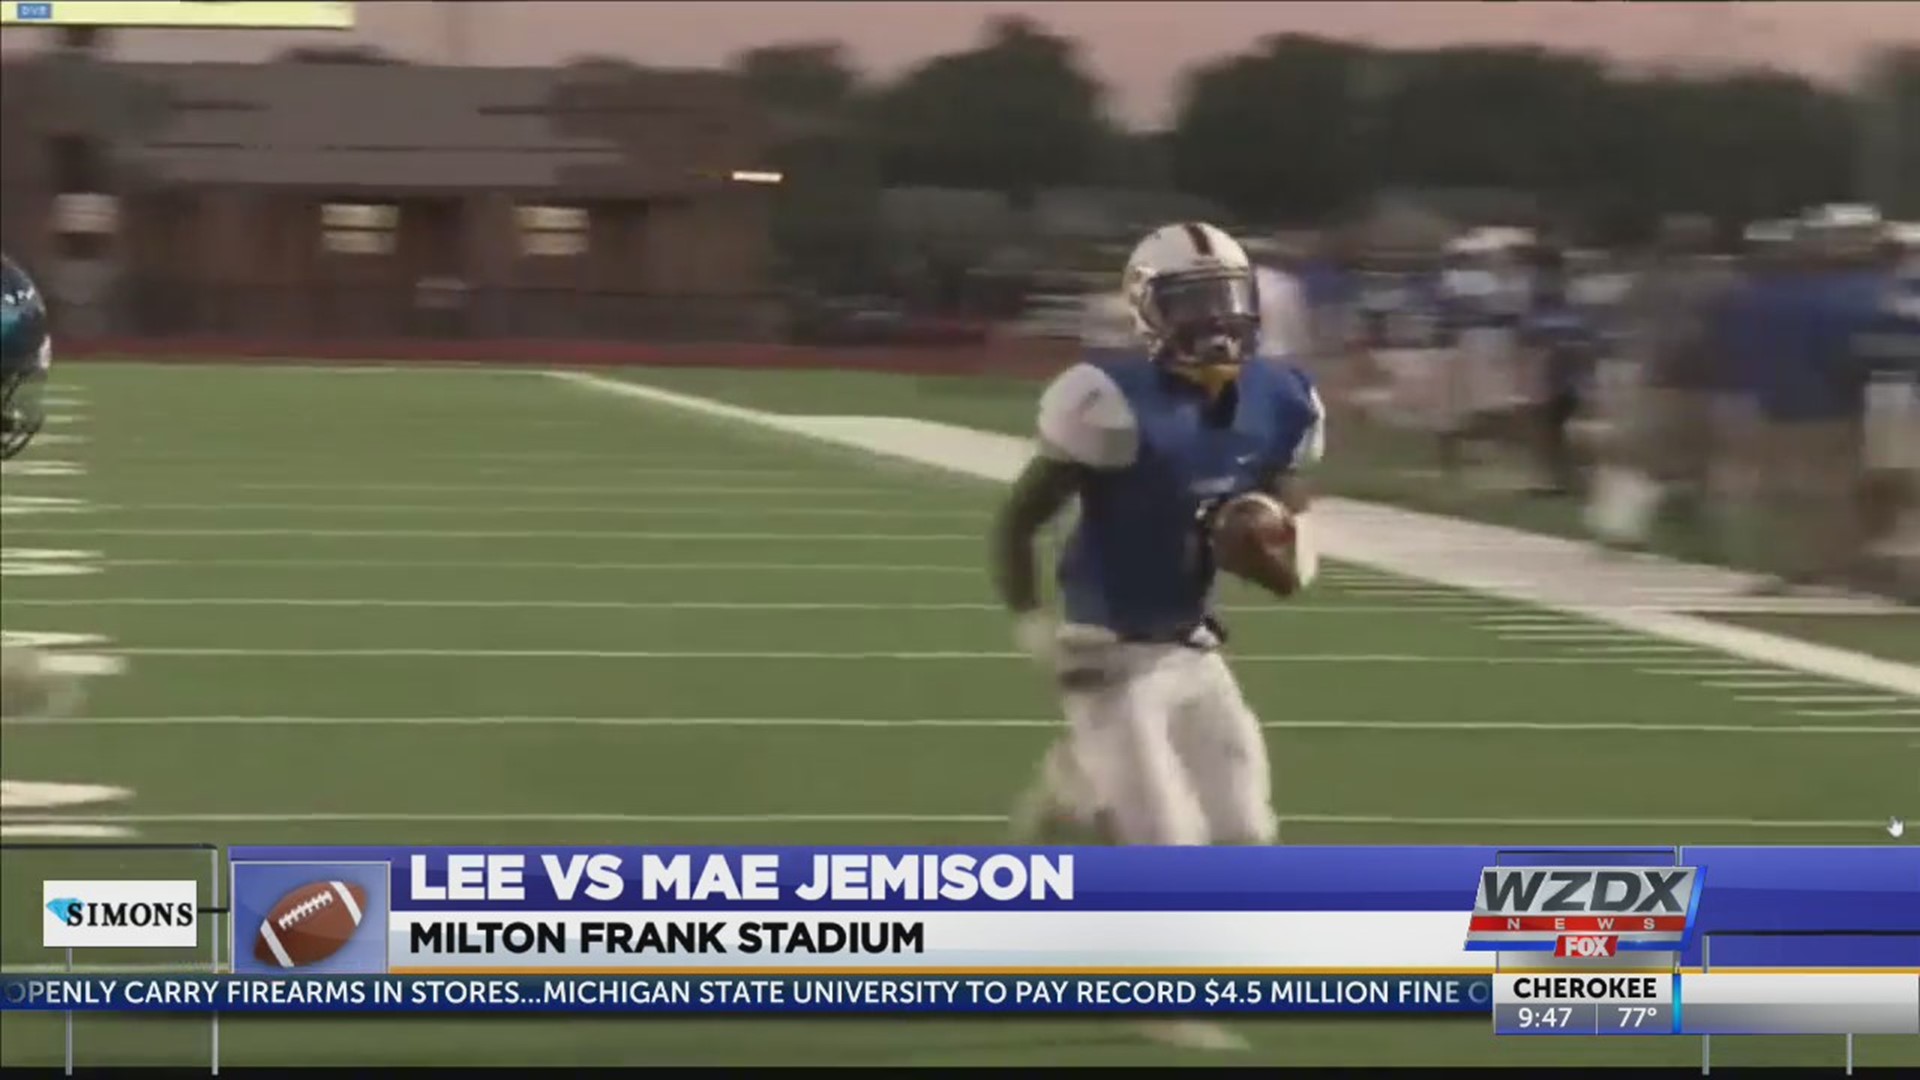 Mae Jemison jumped out to a 15-0 lead and never looked back in a 37-7 victory over cross town rival Lee.